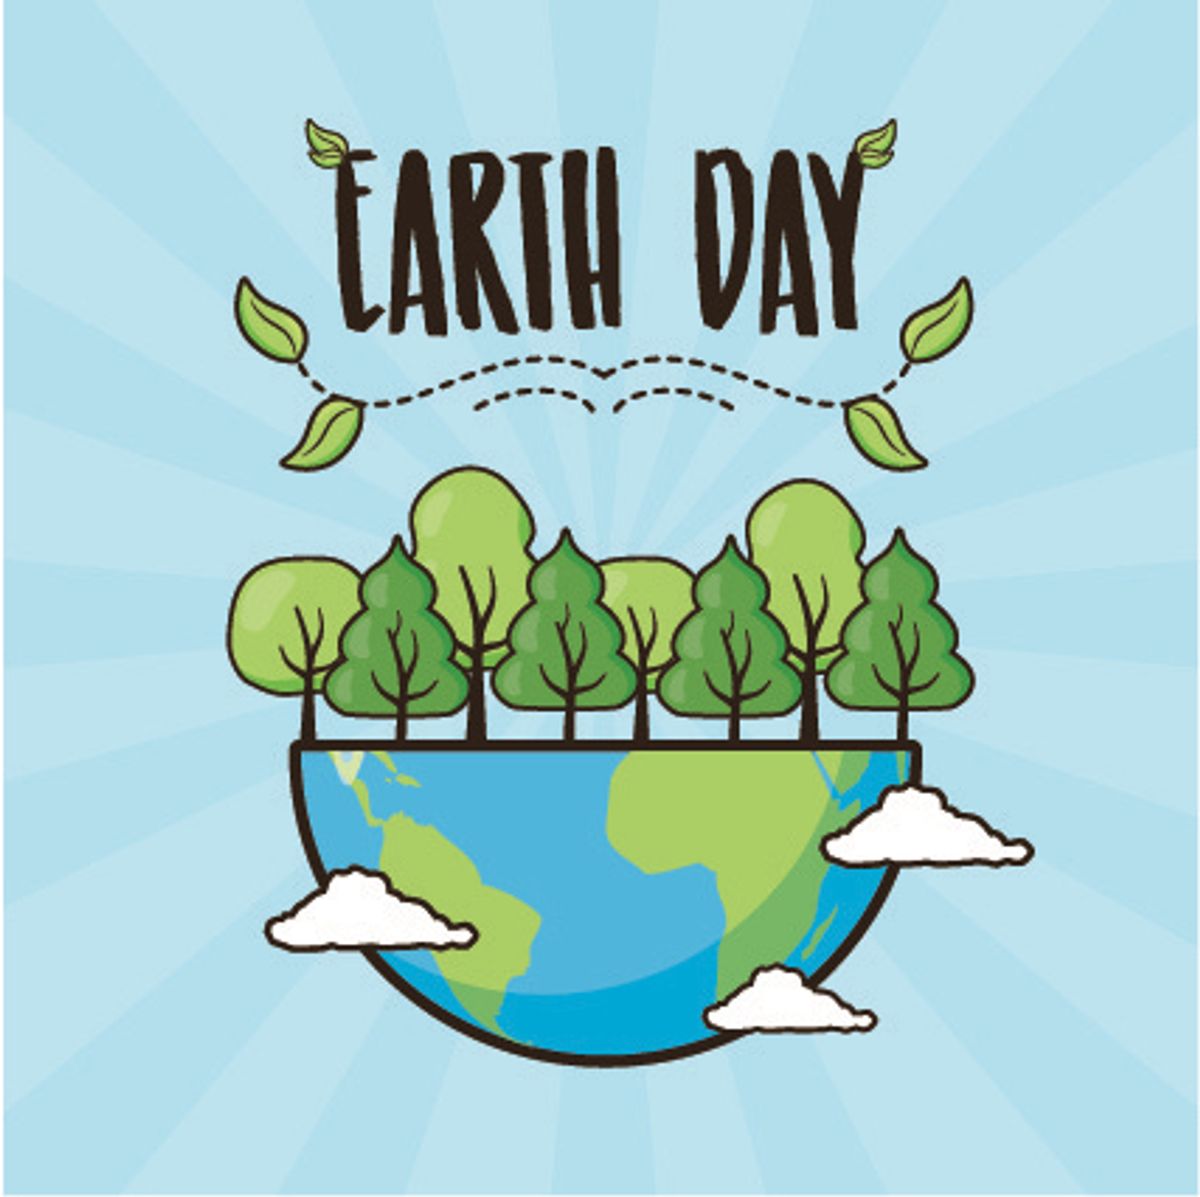 4 ways to keep Earth smiling on National Earth Day!